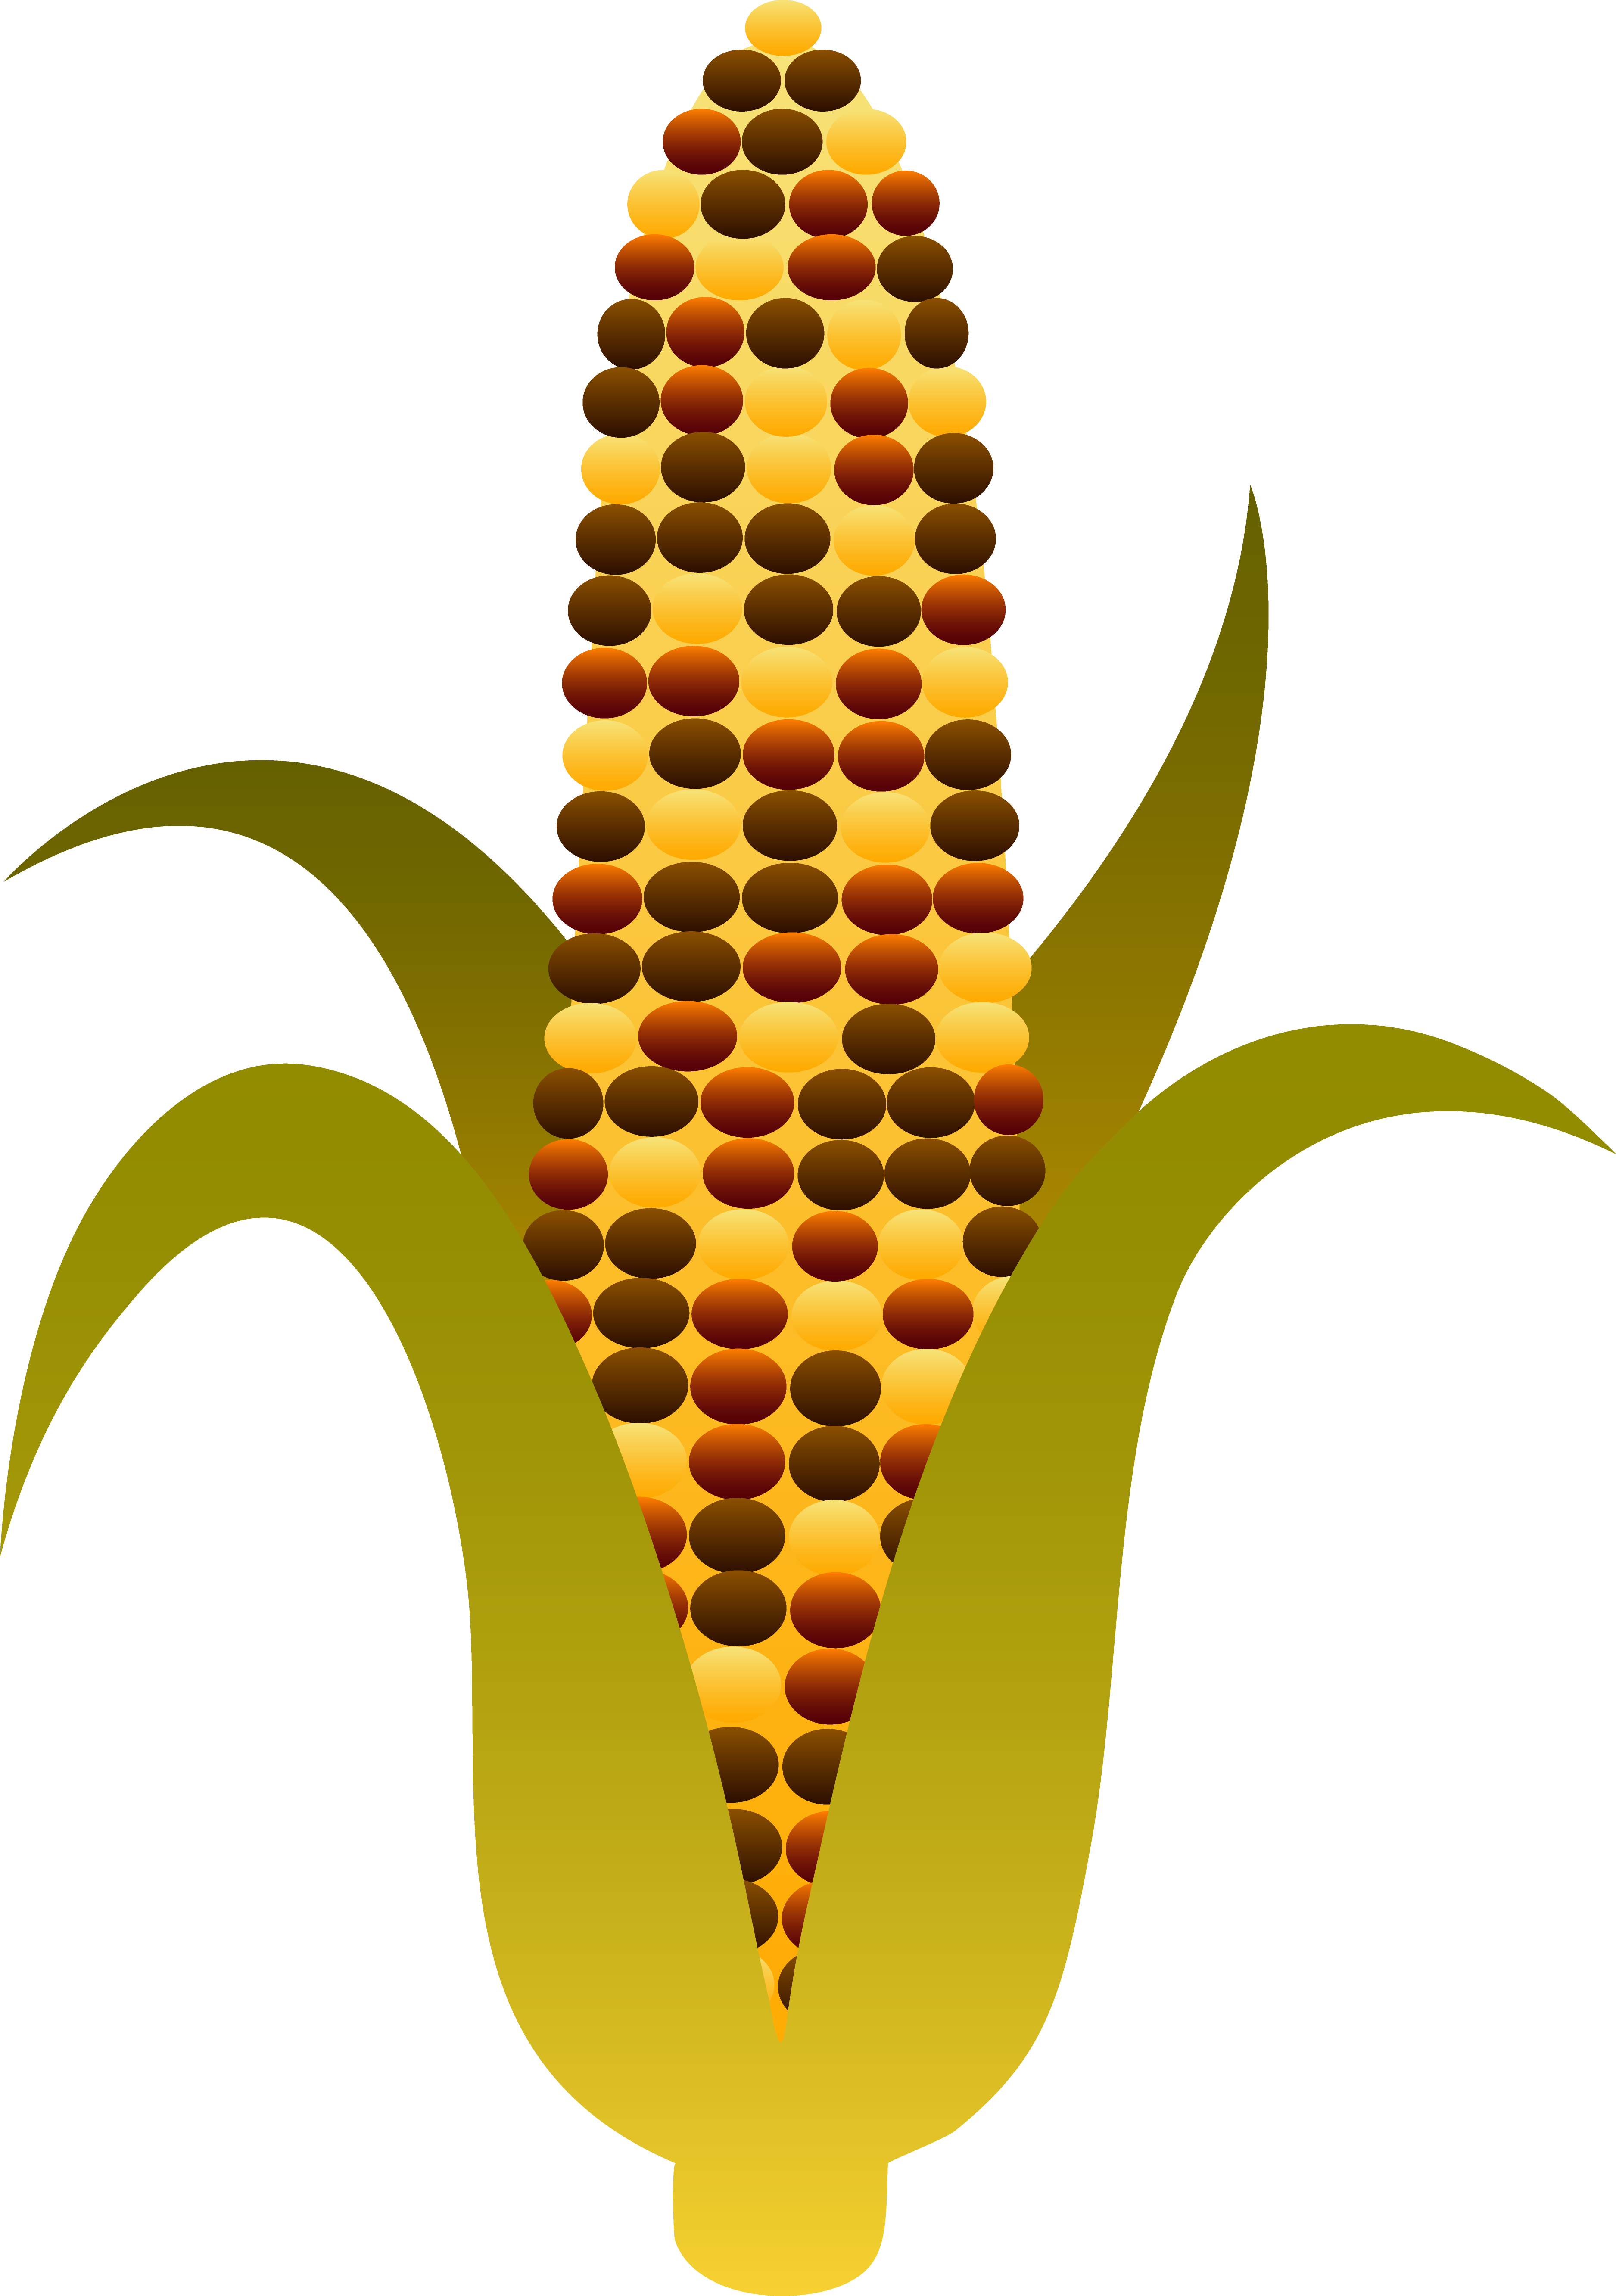 Wagon clipart native american. Indian harvest corn maize